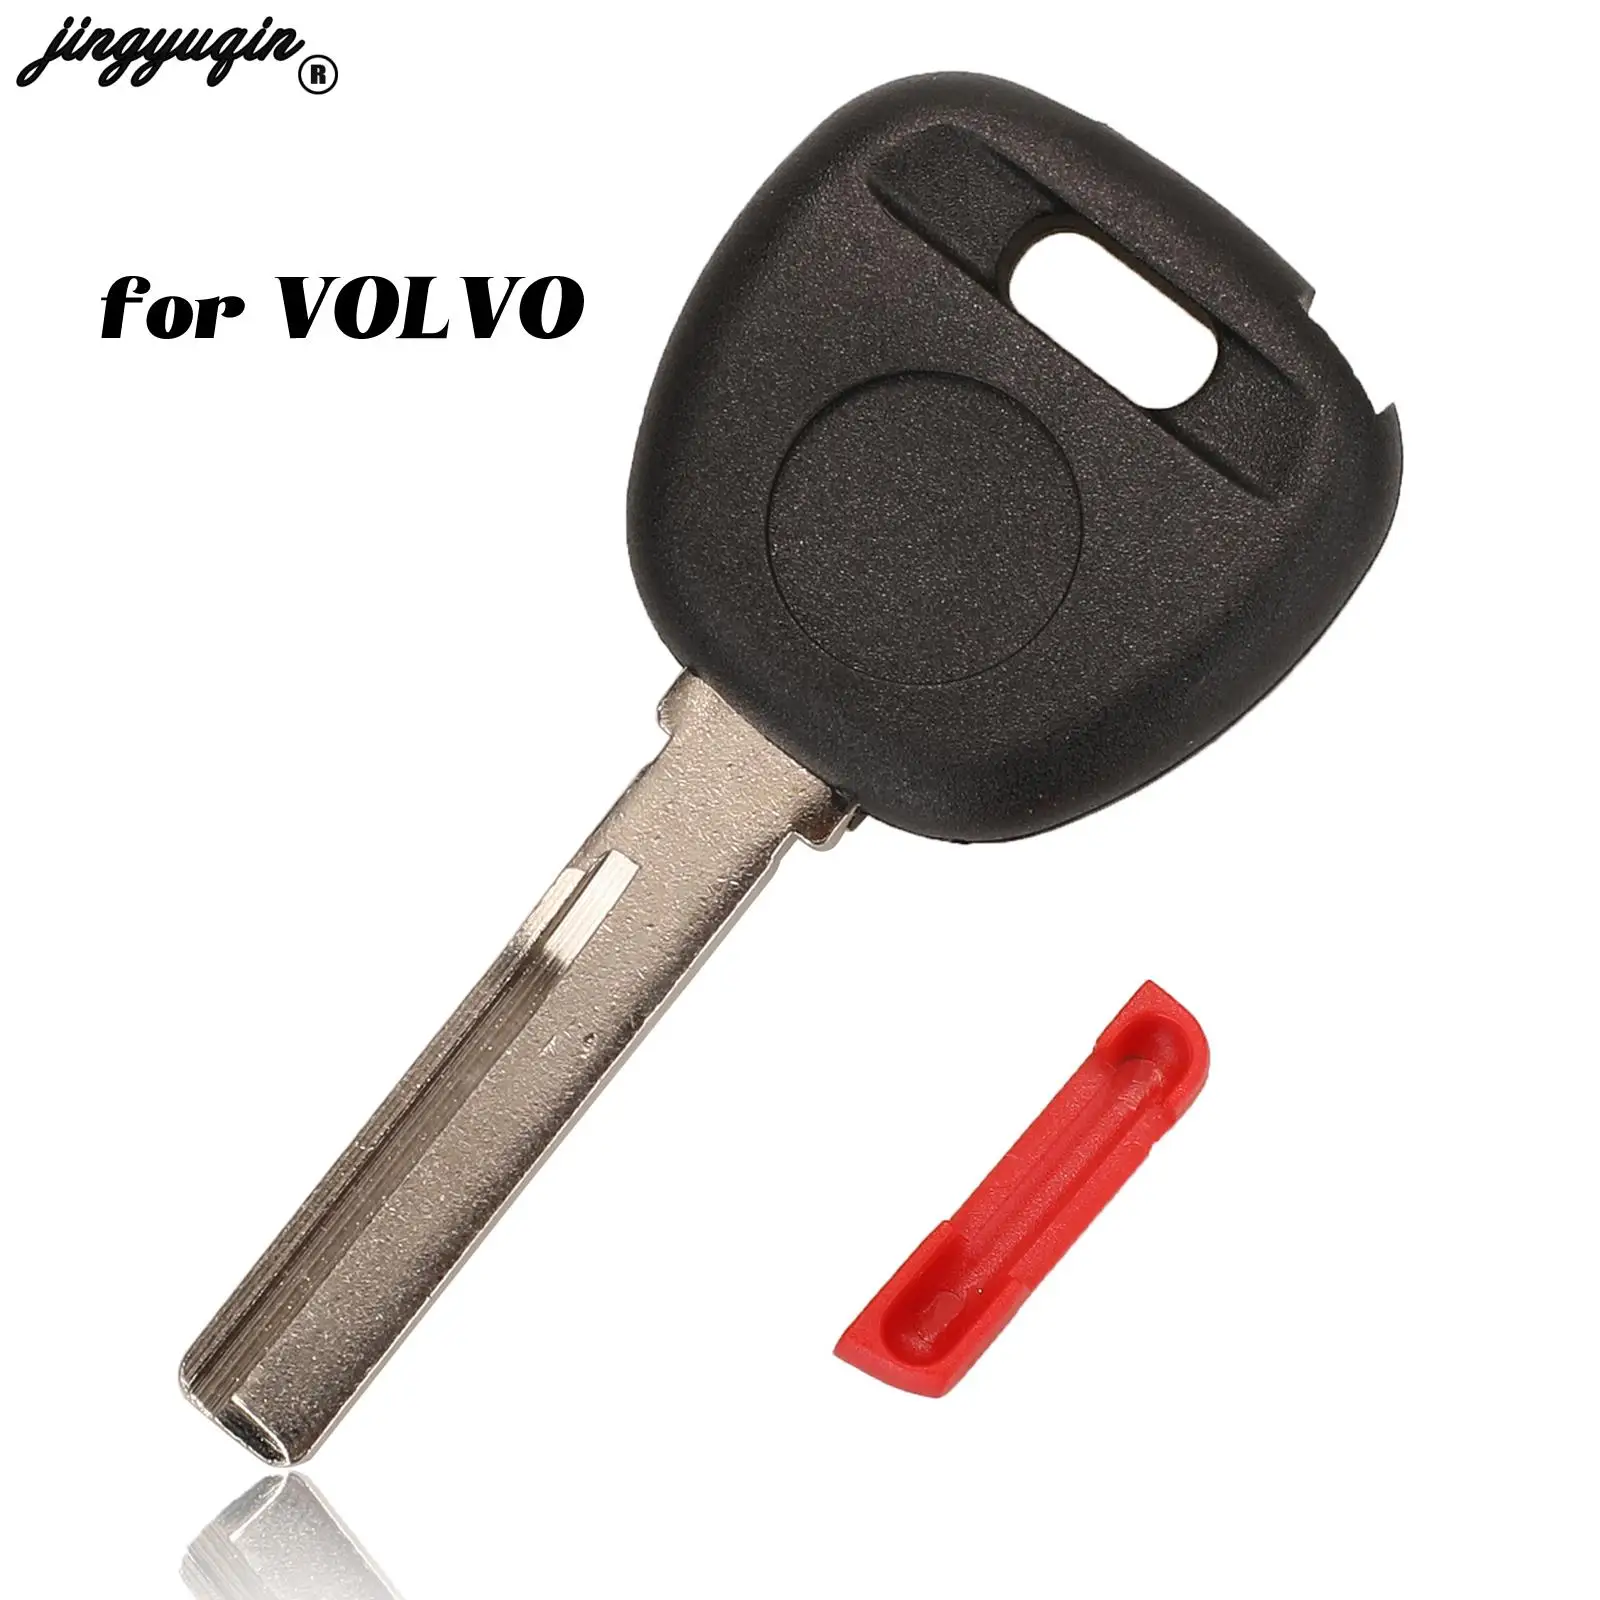 

jingyuqin 10pcs Original Transponder With Red Plug Key shell For Volvo S40 V40 S60 S80 XC70 No Chips Key Case Replacement